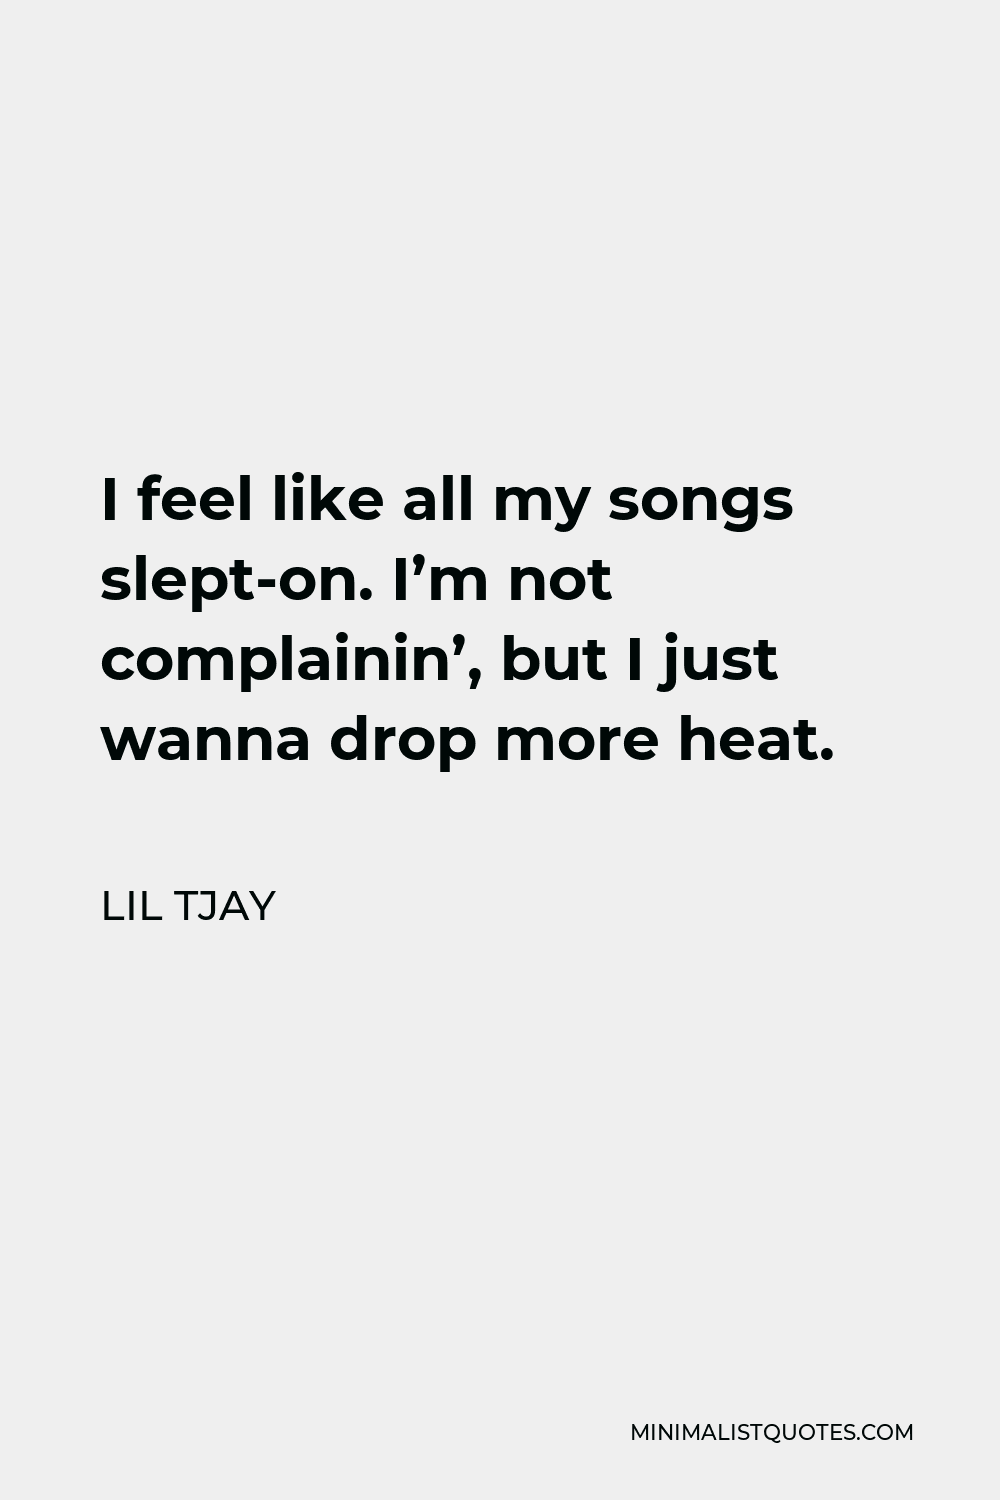 Lil Tjay Quote - I feel like all my songs slept-on. I’m not complainin’, but I just wanna drop more heat.